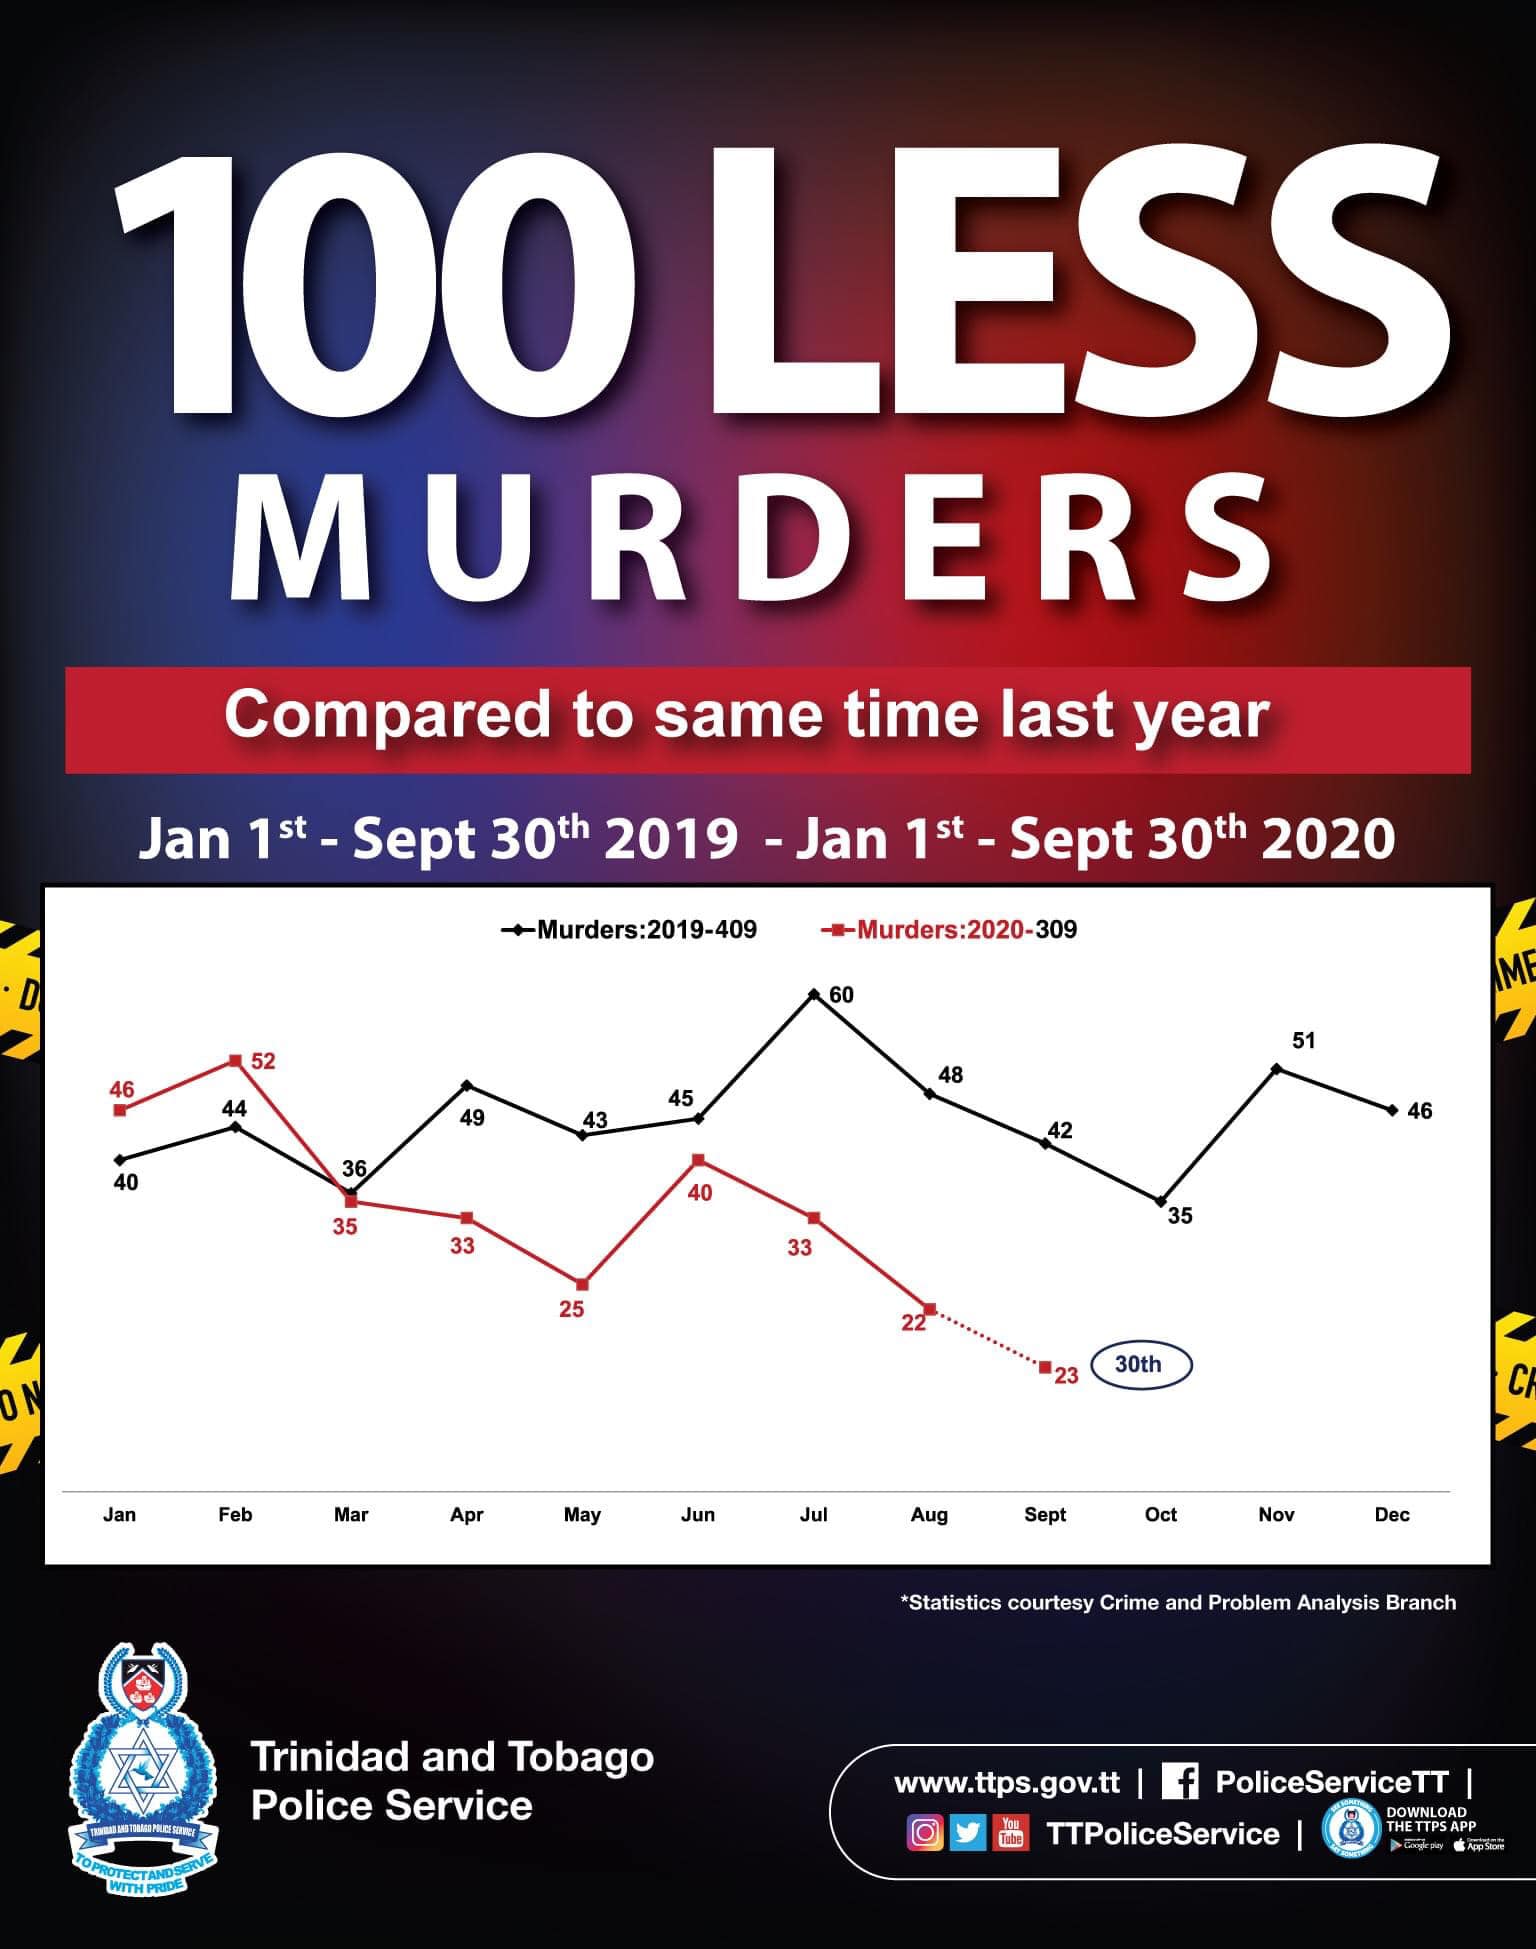 COP plans to reduce murders by 150 by end of 2020